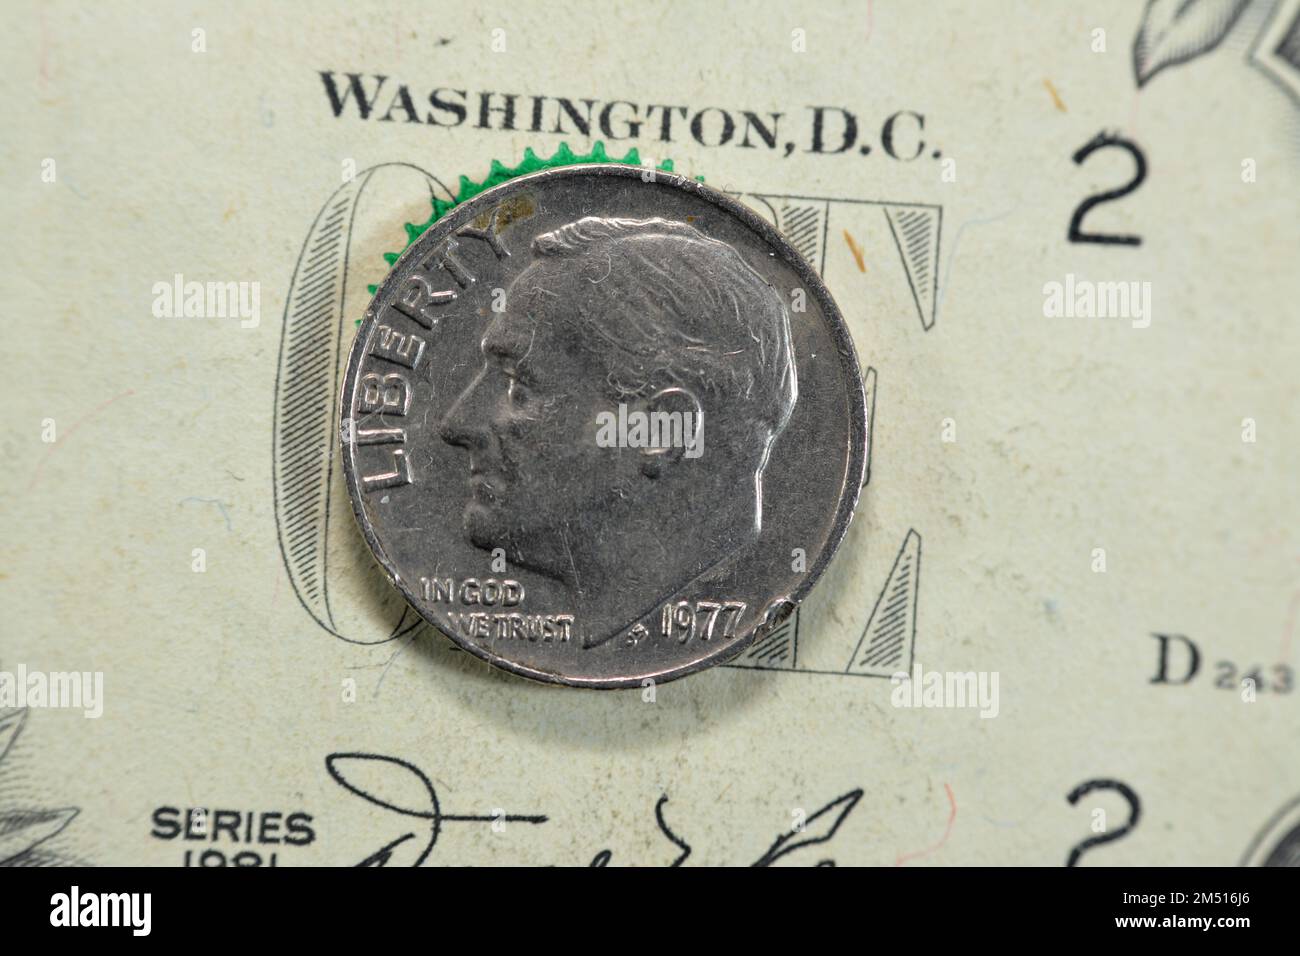 the dime coin, American money coin of 10 ten cents 1977 features the profile of Franklin D. Roosevelt the 32nd president of the United States of Ameri Stock Photo